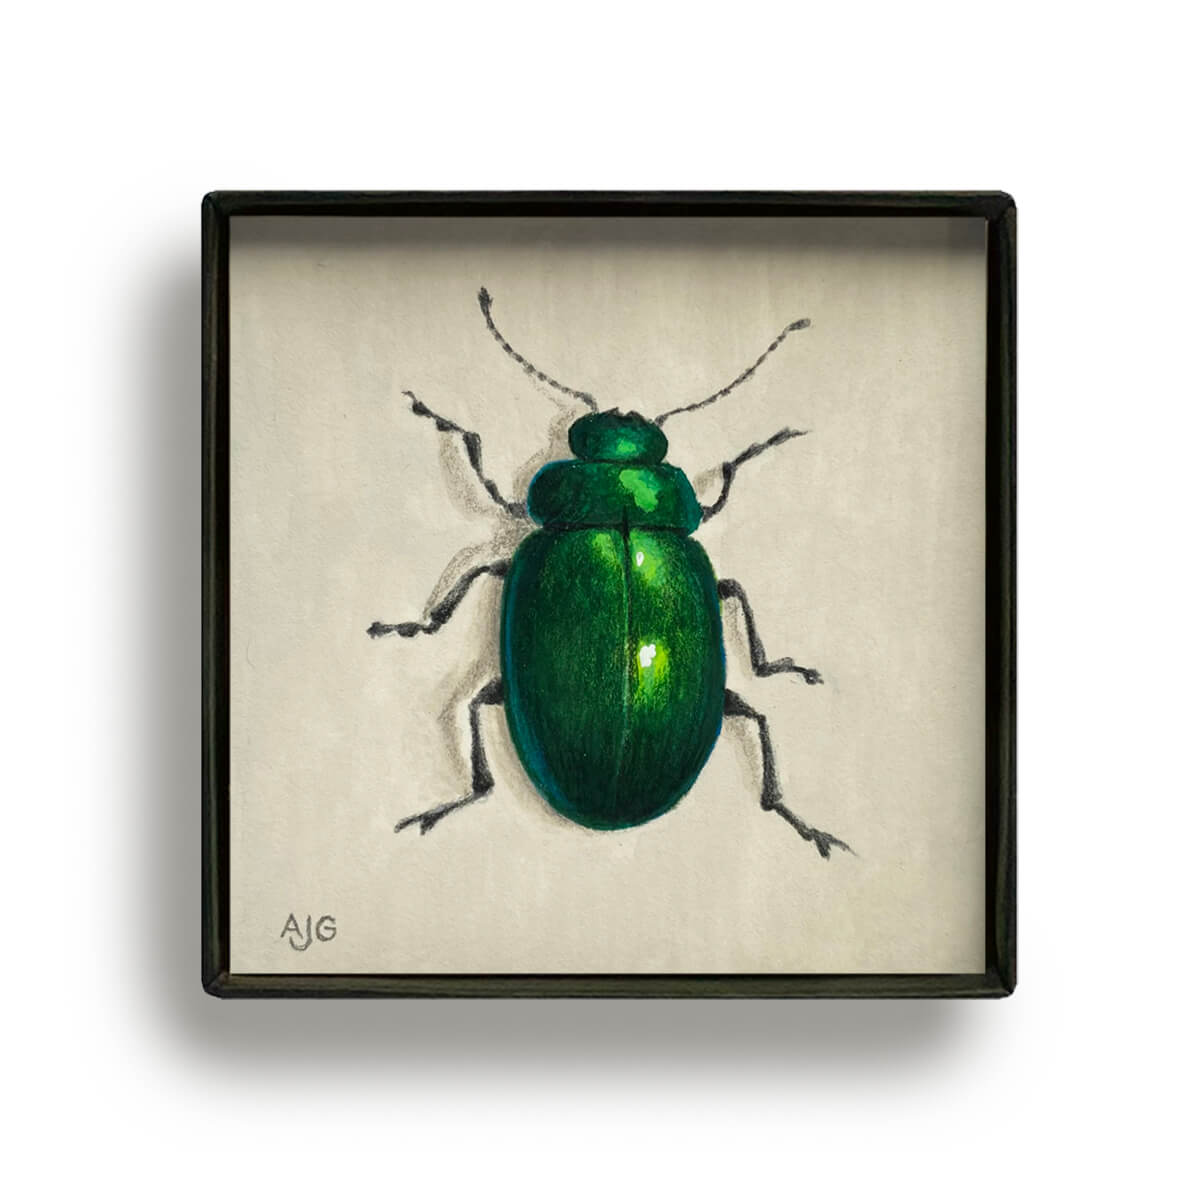 Jewel beetle Picture Box miniature insect painting by Amanda Gosse